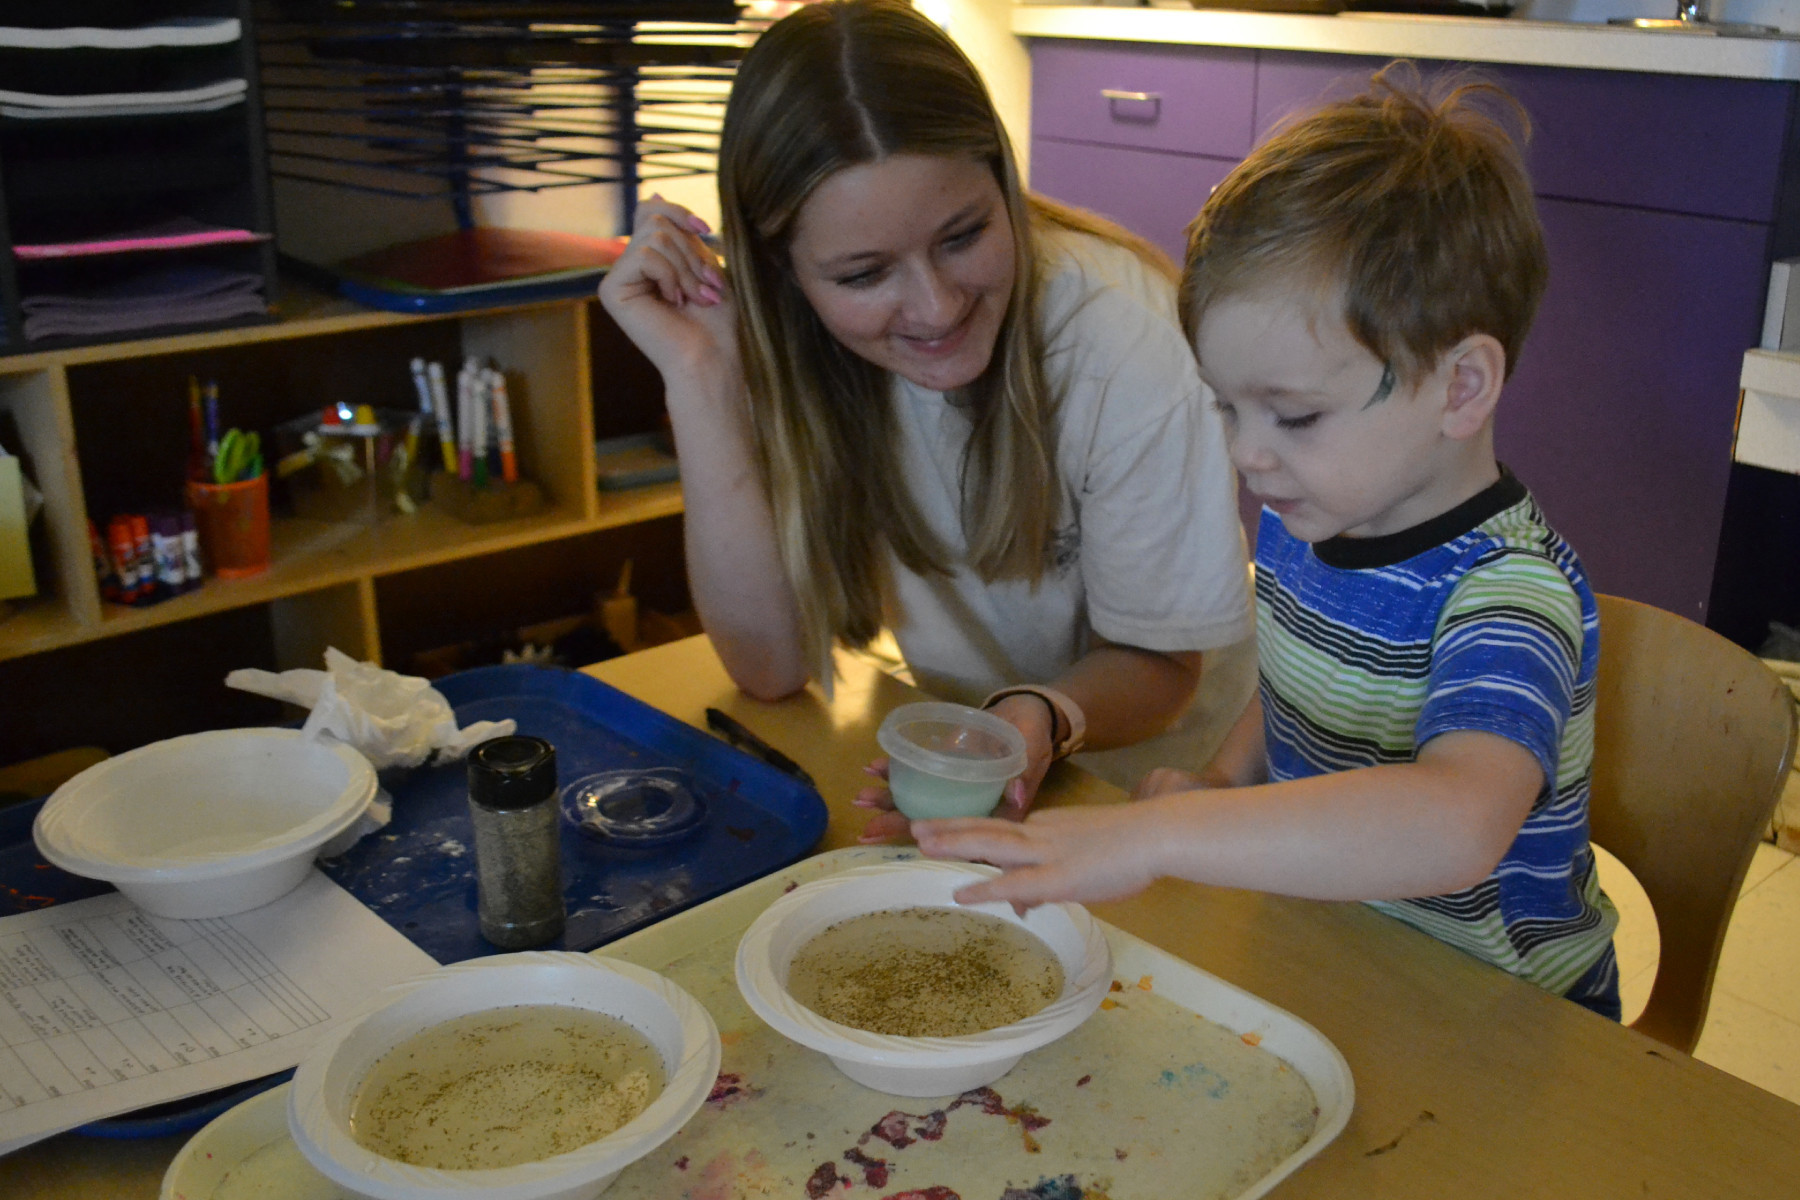 Student Jennifer Marra with child at table in preschool